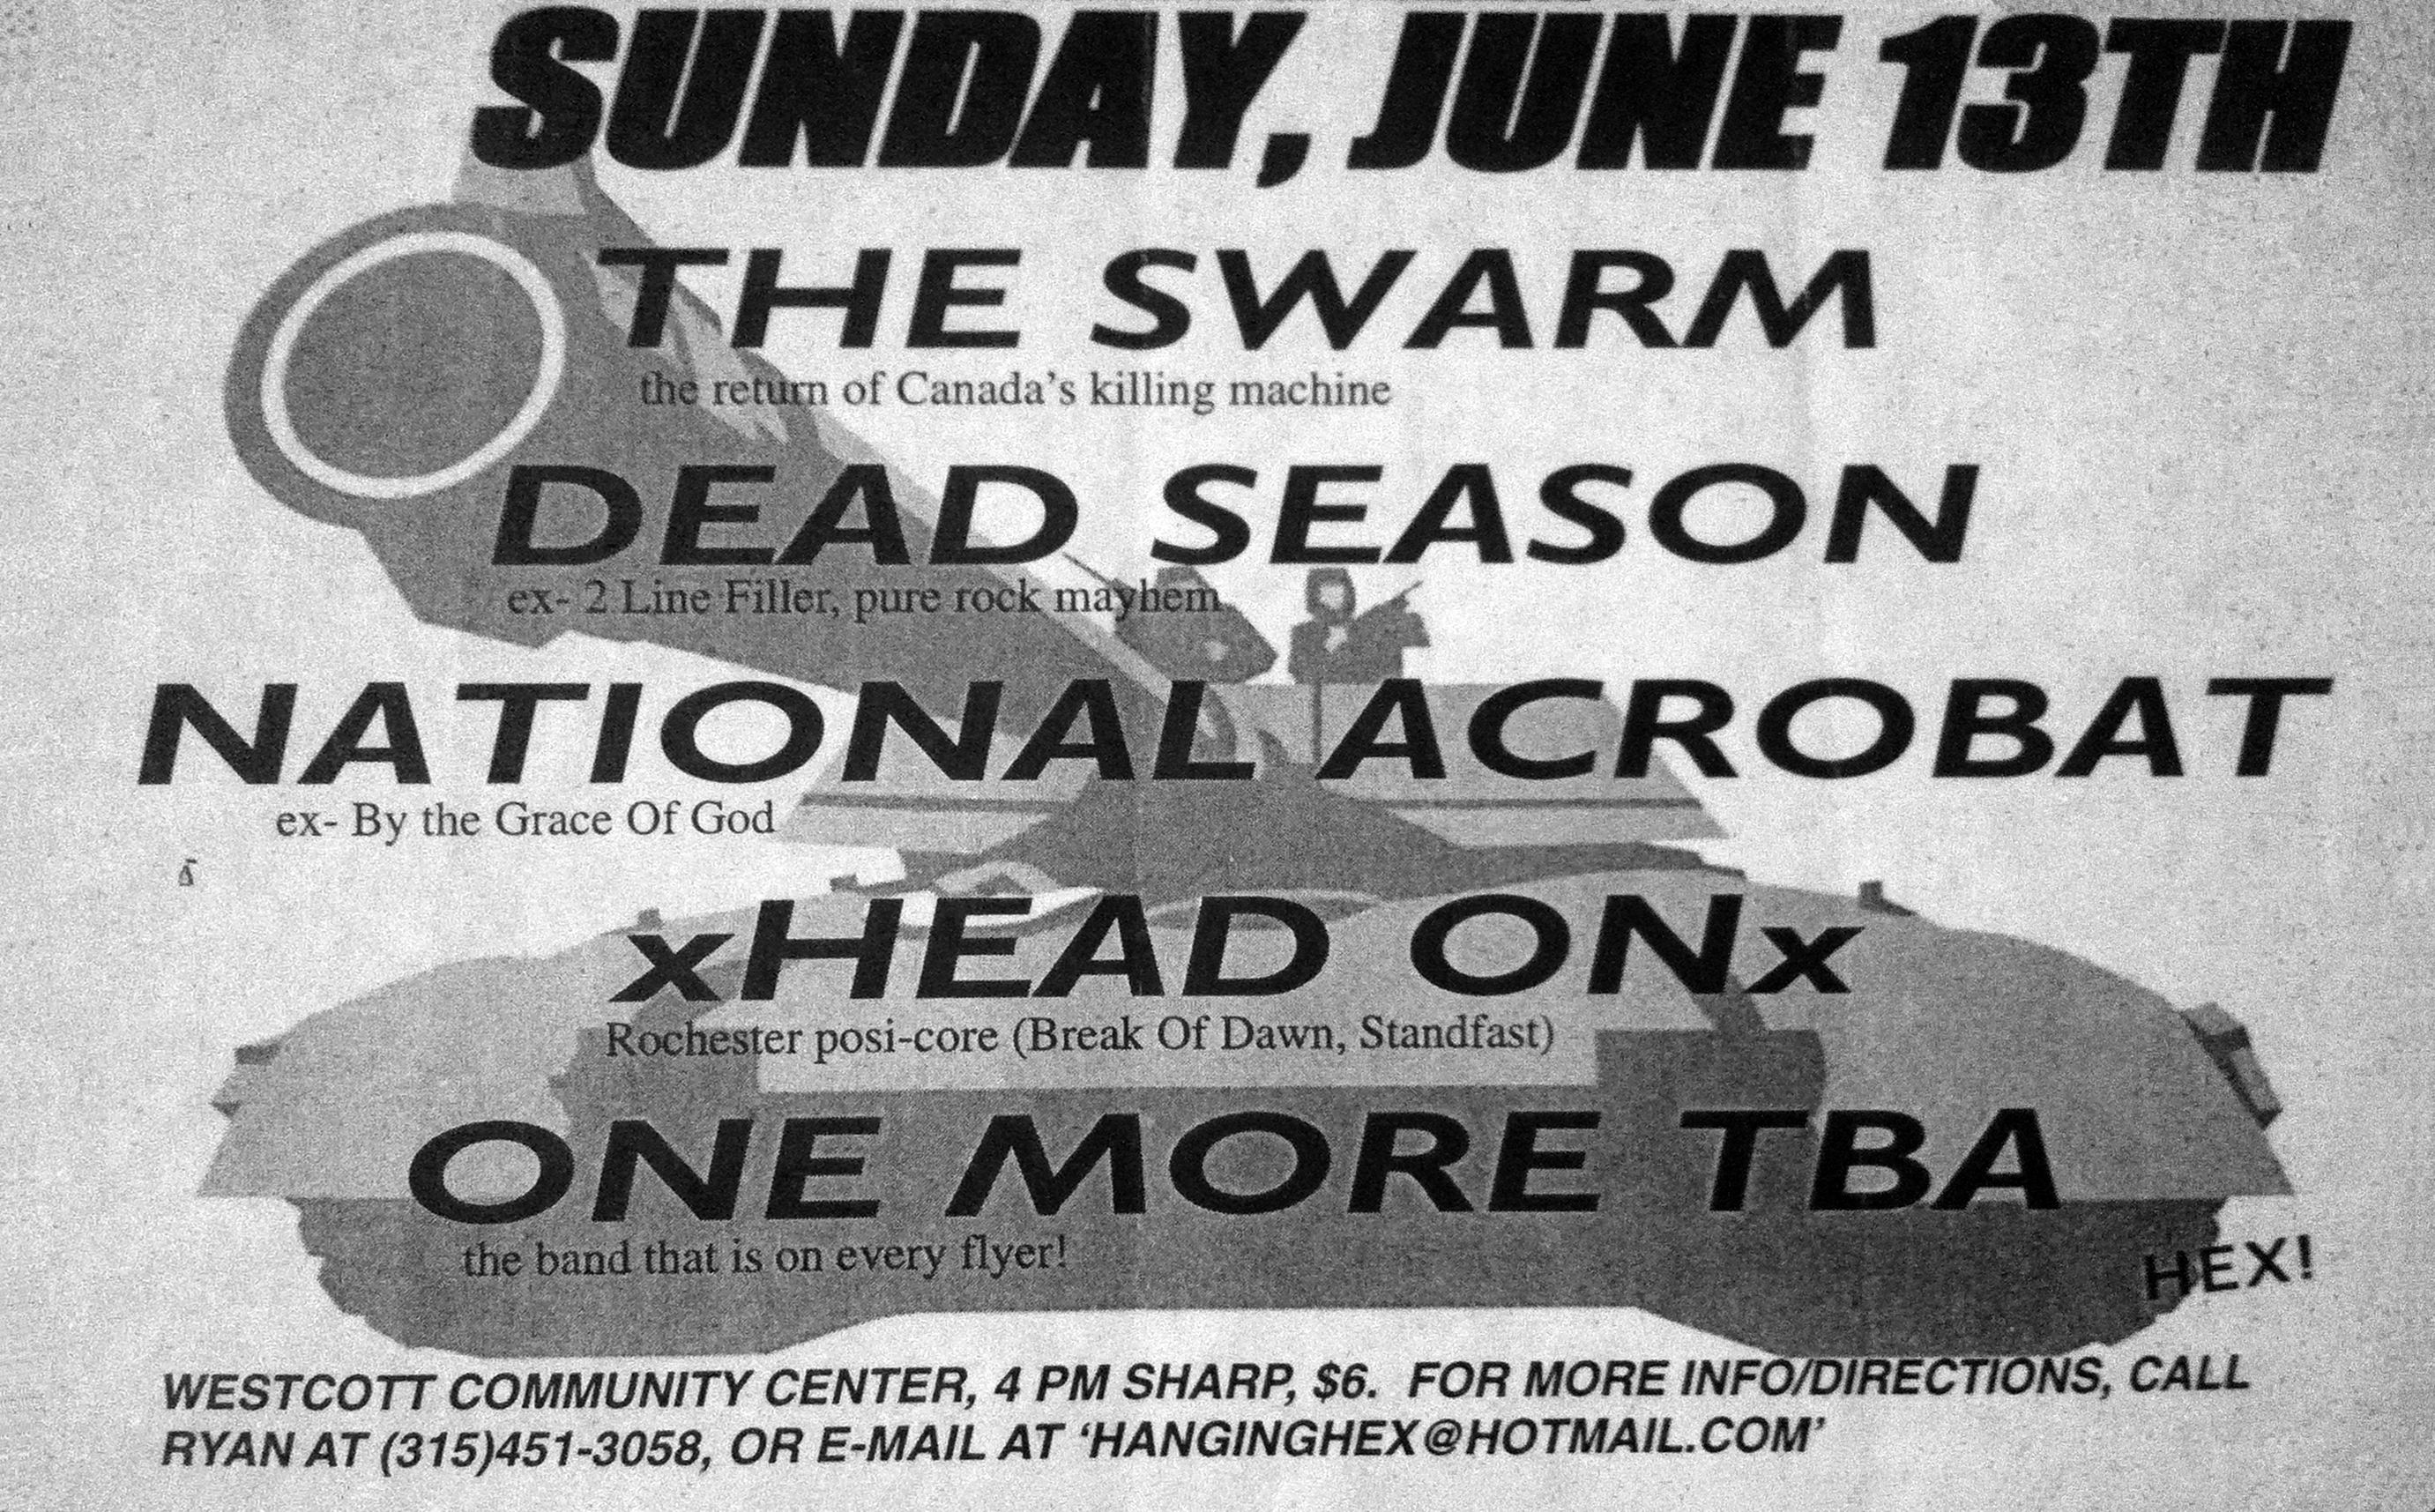 June 13th 1999. The Swarm at Westcott Community Center (Syracuse, NY). With The National Acrobat and Head On